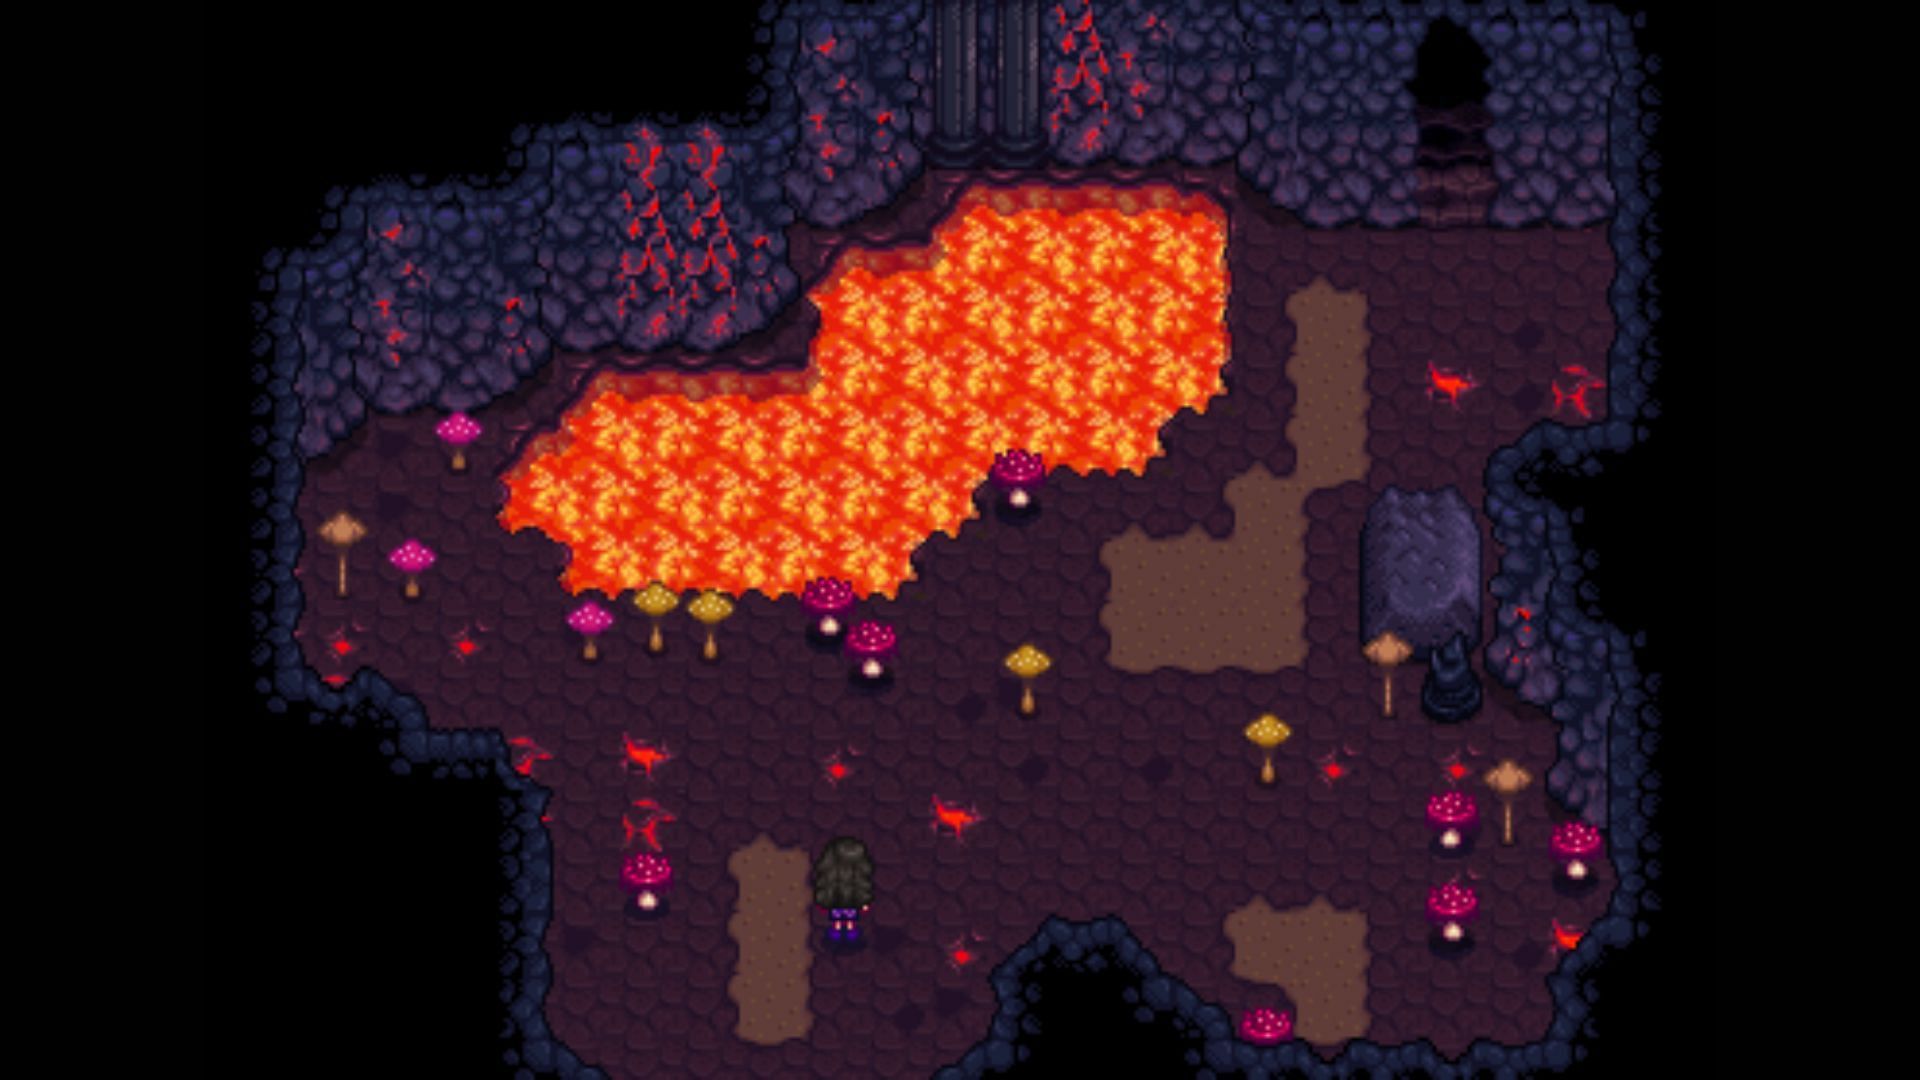 The Forge is unlocked at level 10 of the Volcano Dungeon (Image via ConcernedApe)